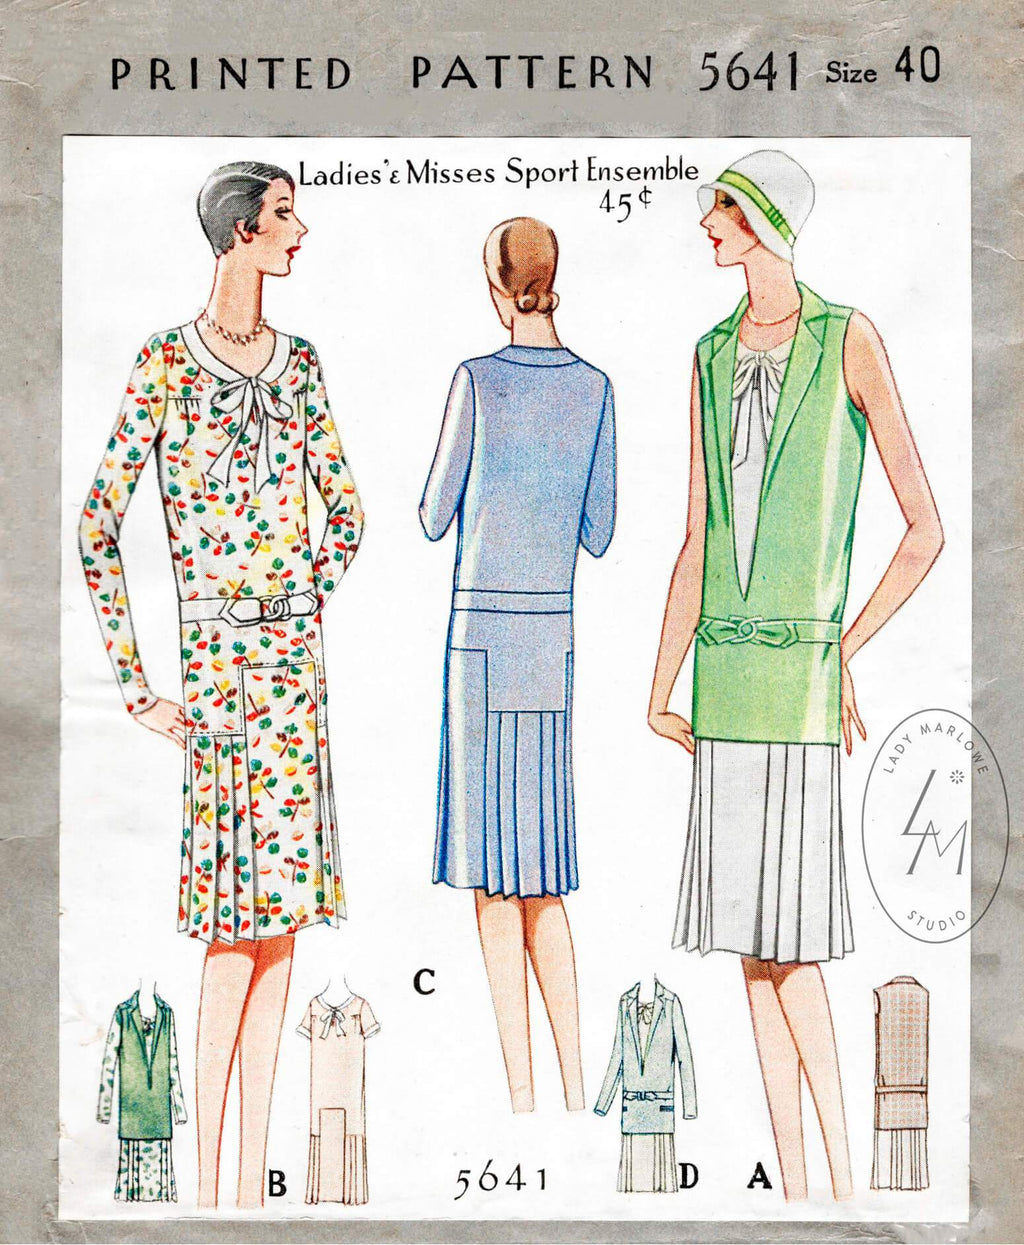 McCall 5641 1920s 1929 sportswear ensemble jacket vest and dress flapper style vintage sewing pattern reproduction